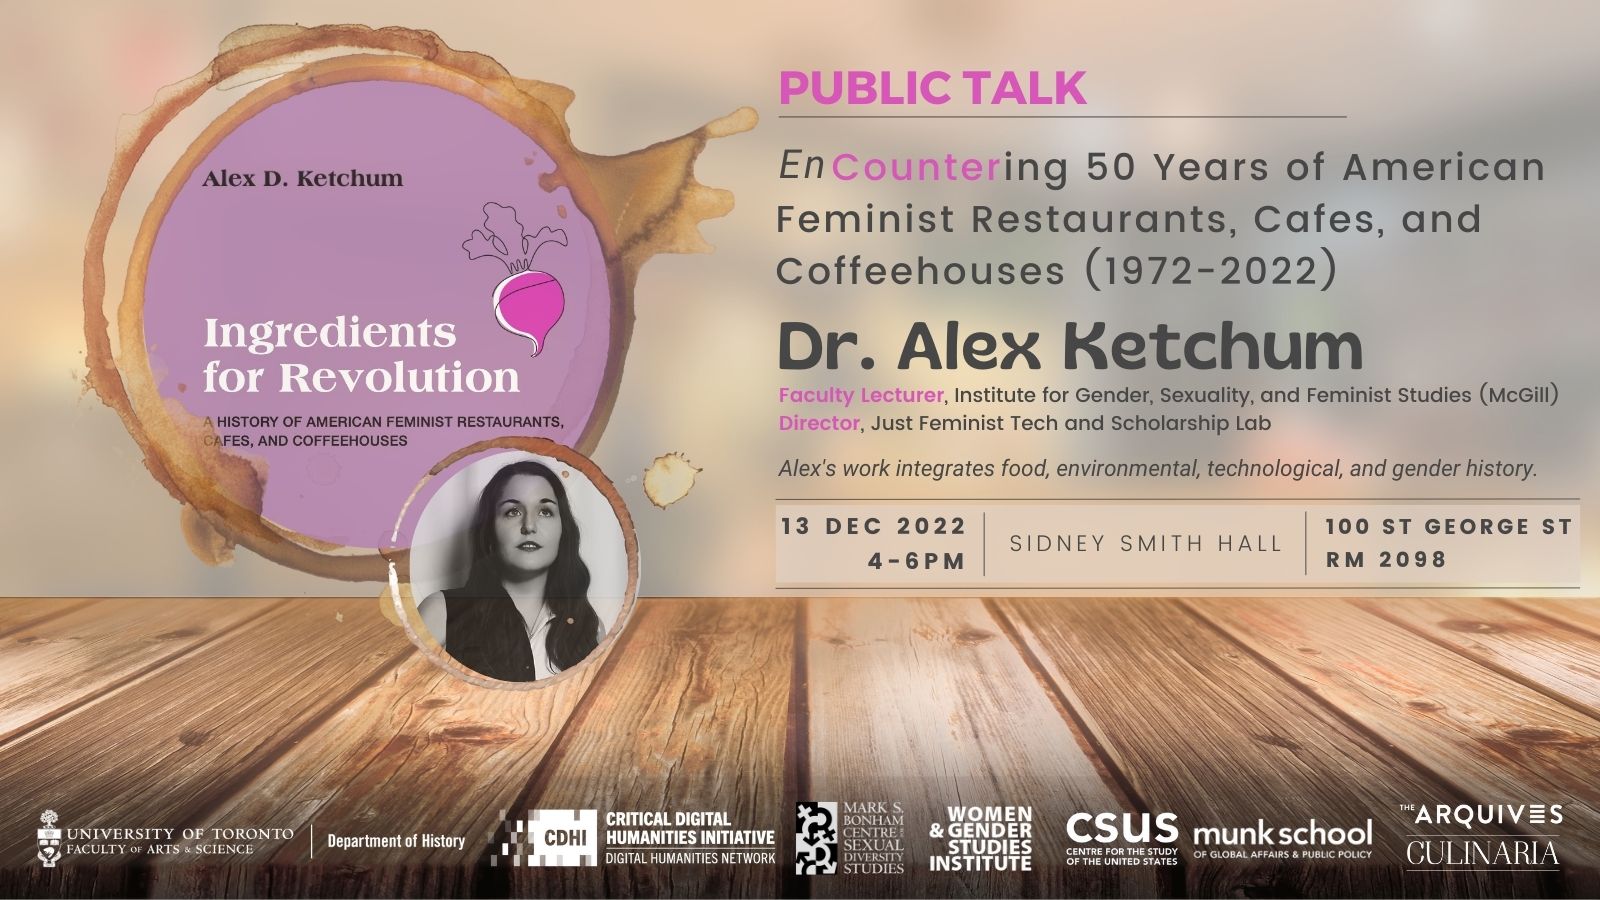 Public Talk by Alex Ketchum - EnCountering 50 Years of American Feminist Restaurants, Cafes, and Coffeehouses (1972-2022)